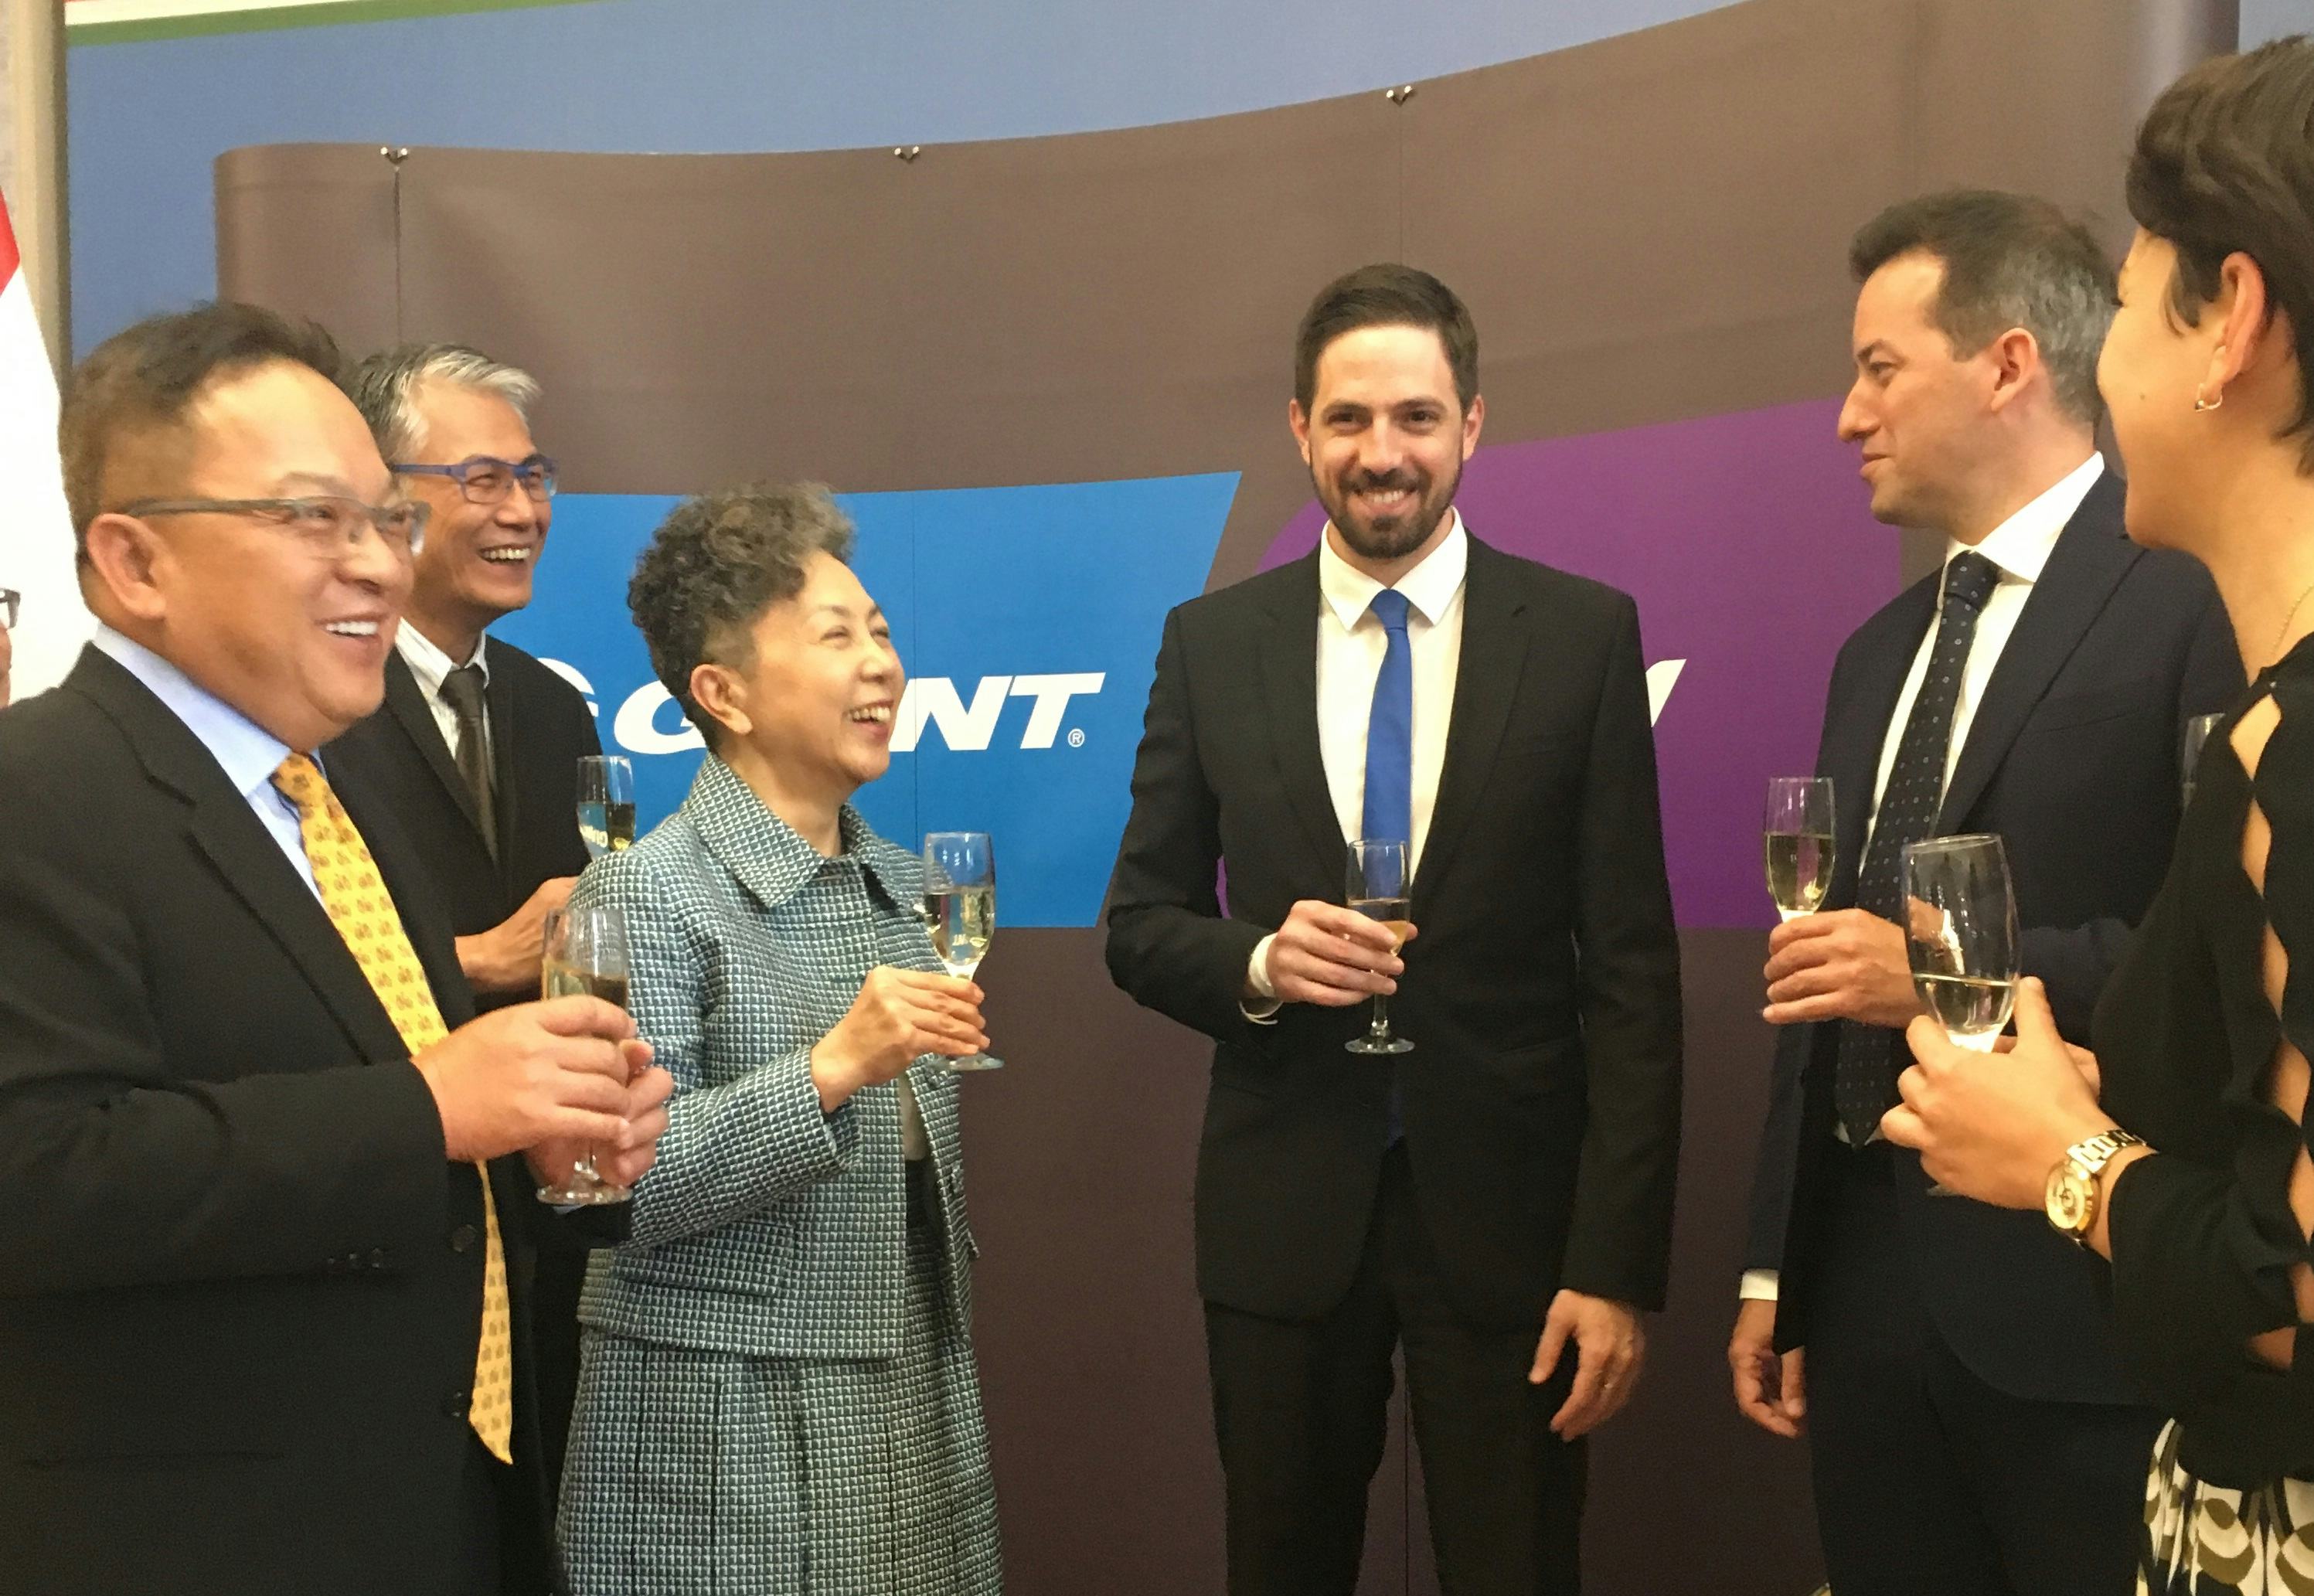 Hungarian officials and Giant executives after the joint press conference. Representing Giant Global Group (fltr.), CEO Young Liu, CMO Yugo Yarn, Chairperson Bonnie Tu, together with Deputy Minister of Foreign Affairs and Trade Levente Magyar and HIPA President Robert Esik. – Photo Giant